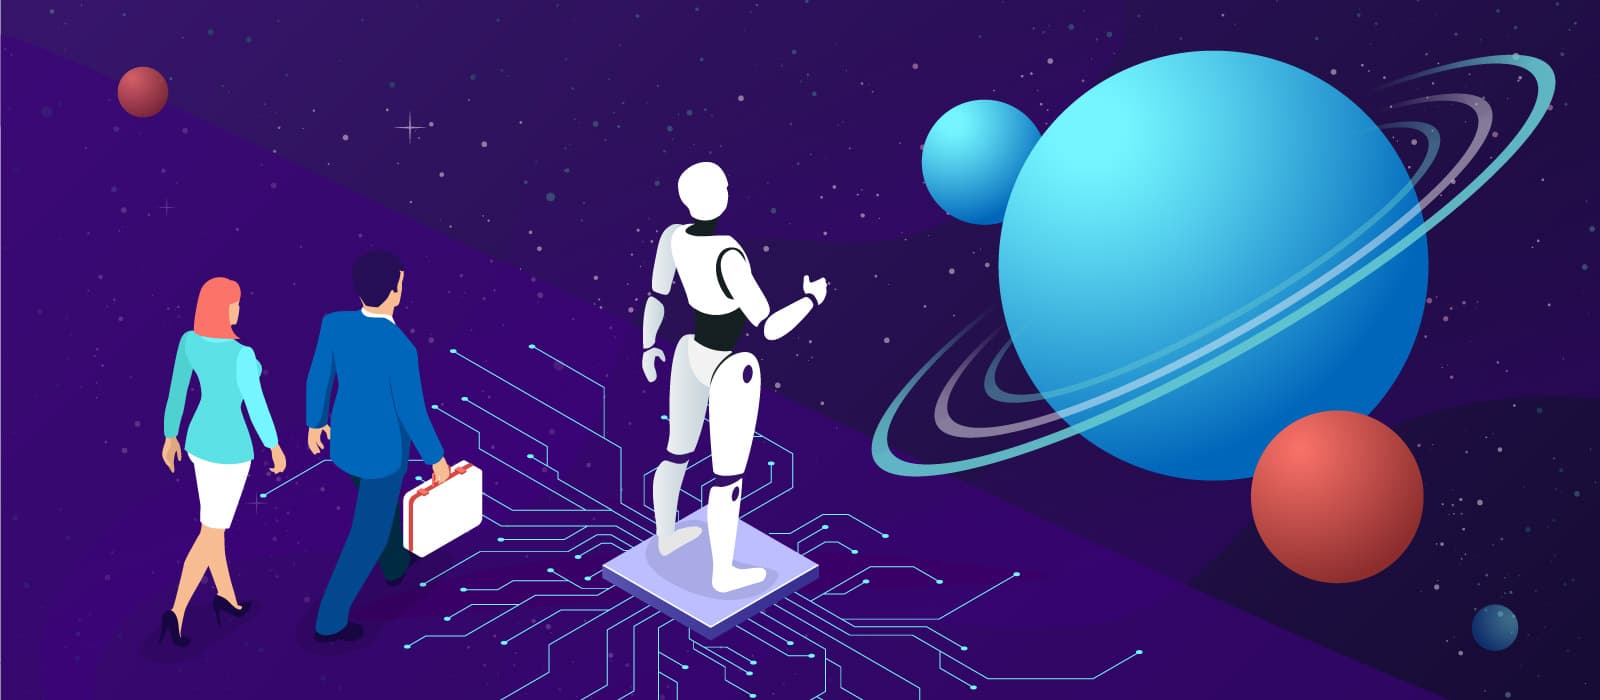 An android standing on a microchip and two people walking toward a blue planet in space